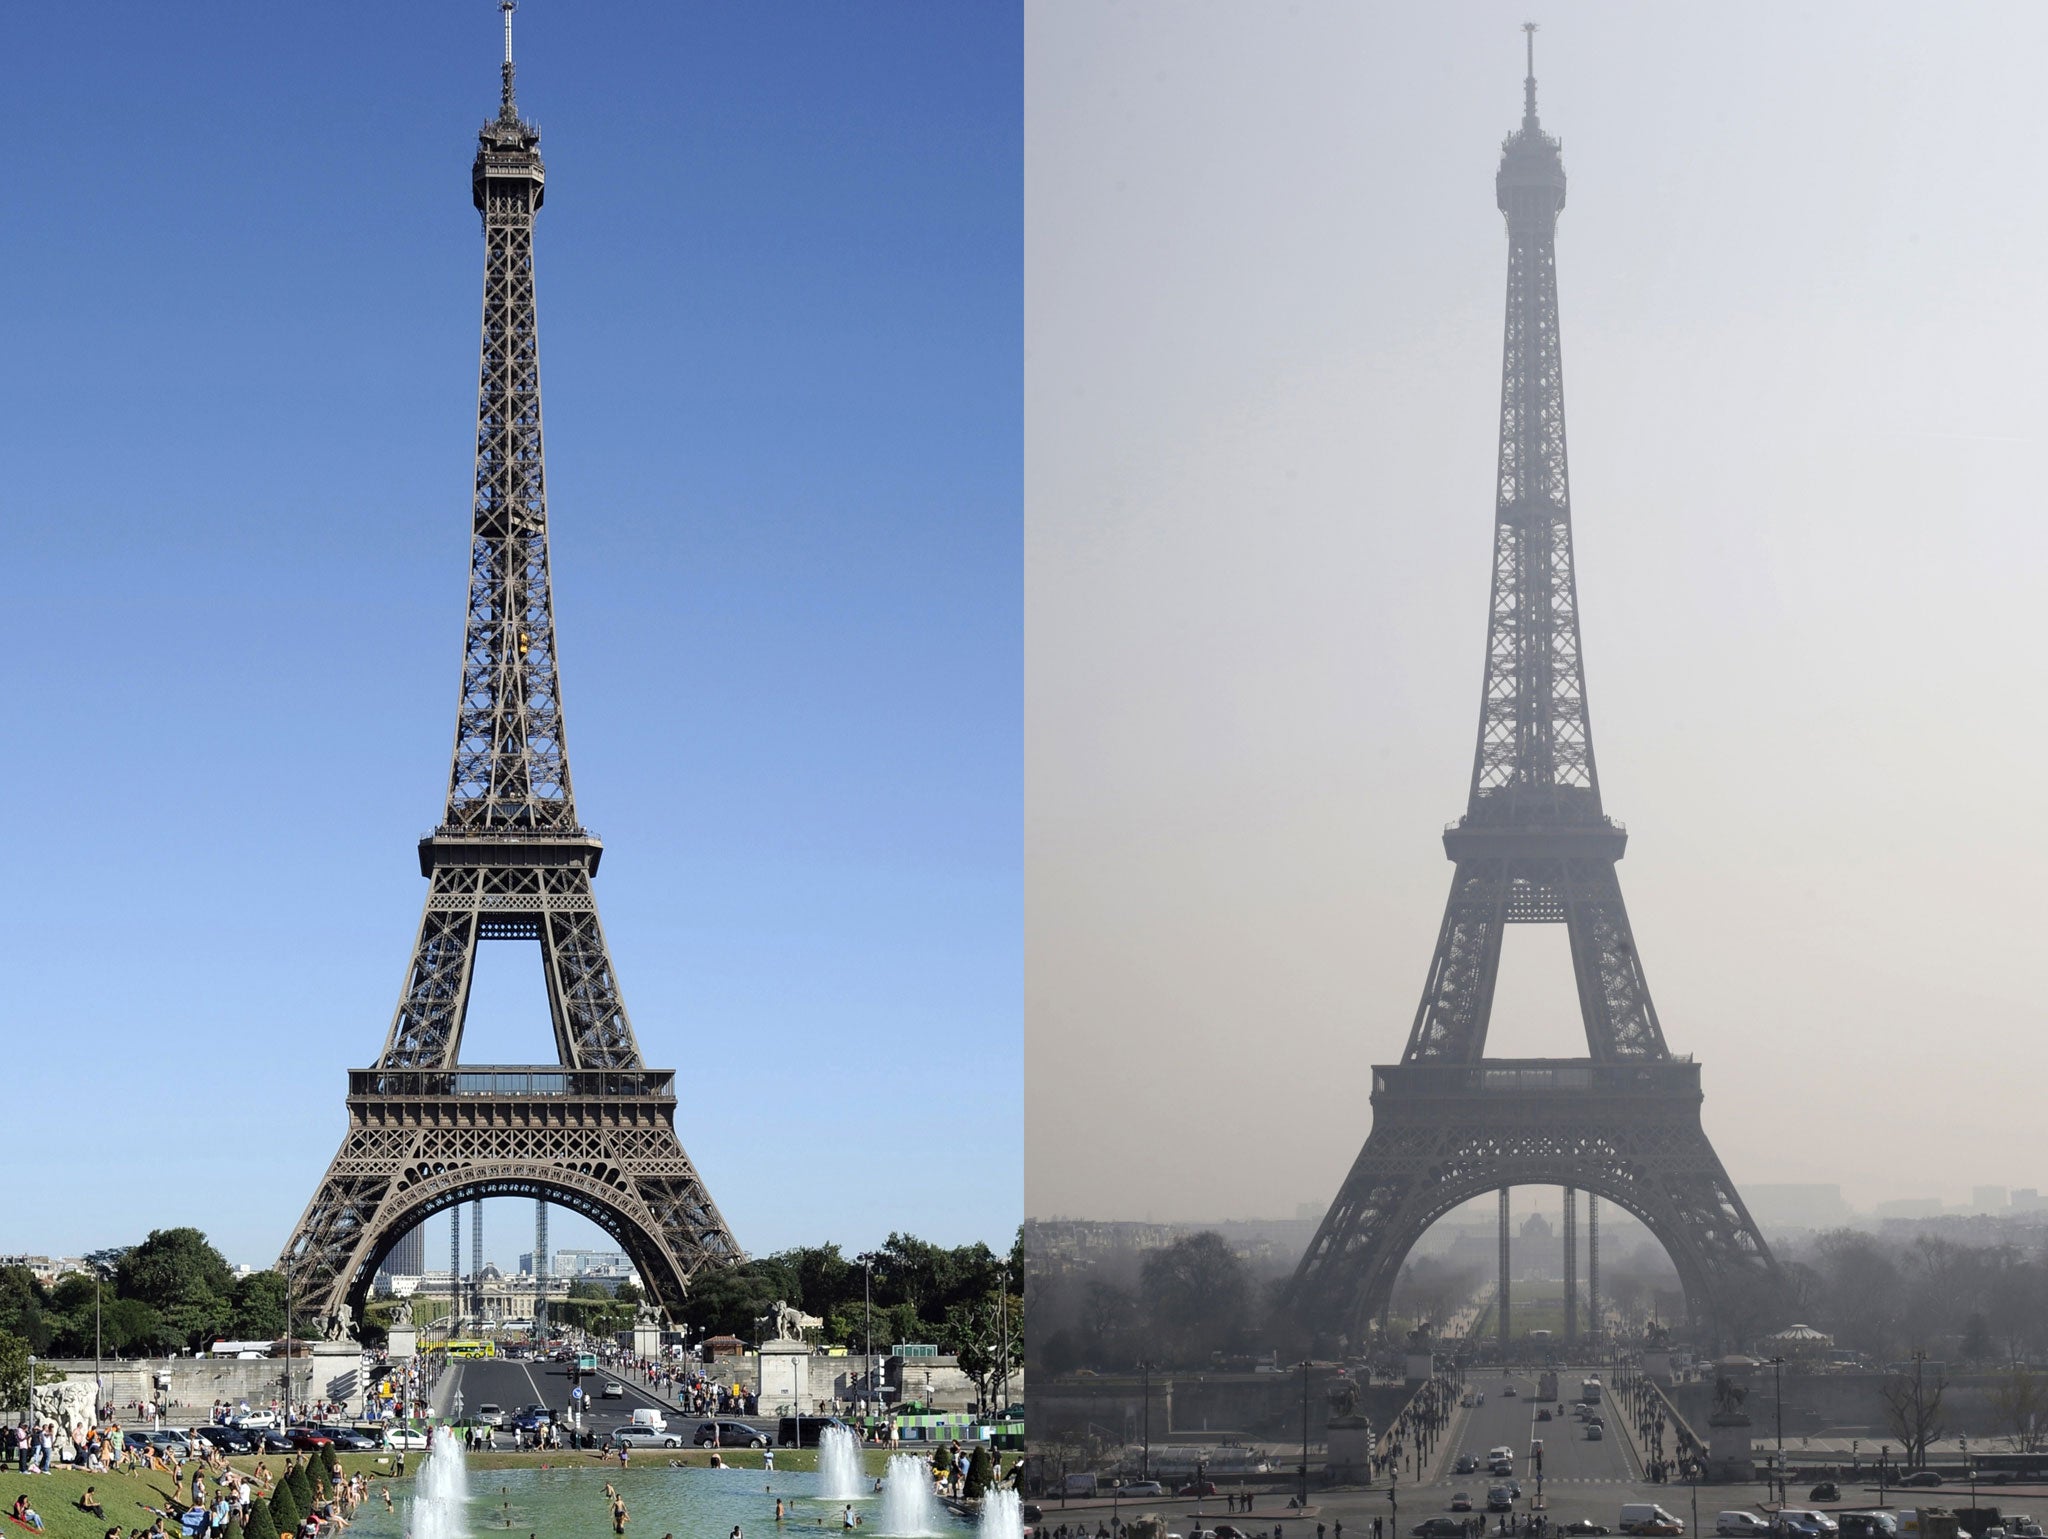 This combination of photos shows the Eiffel tower (R) in central Paris through a haze of pollution taken on March 14, 2014 and during clear weather (L) on August 17, 2012.